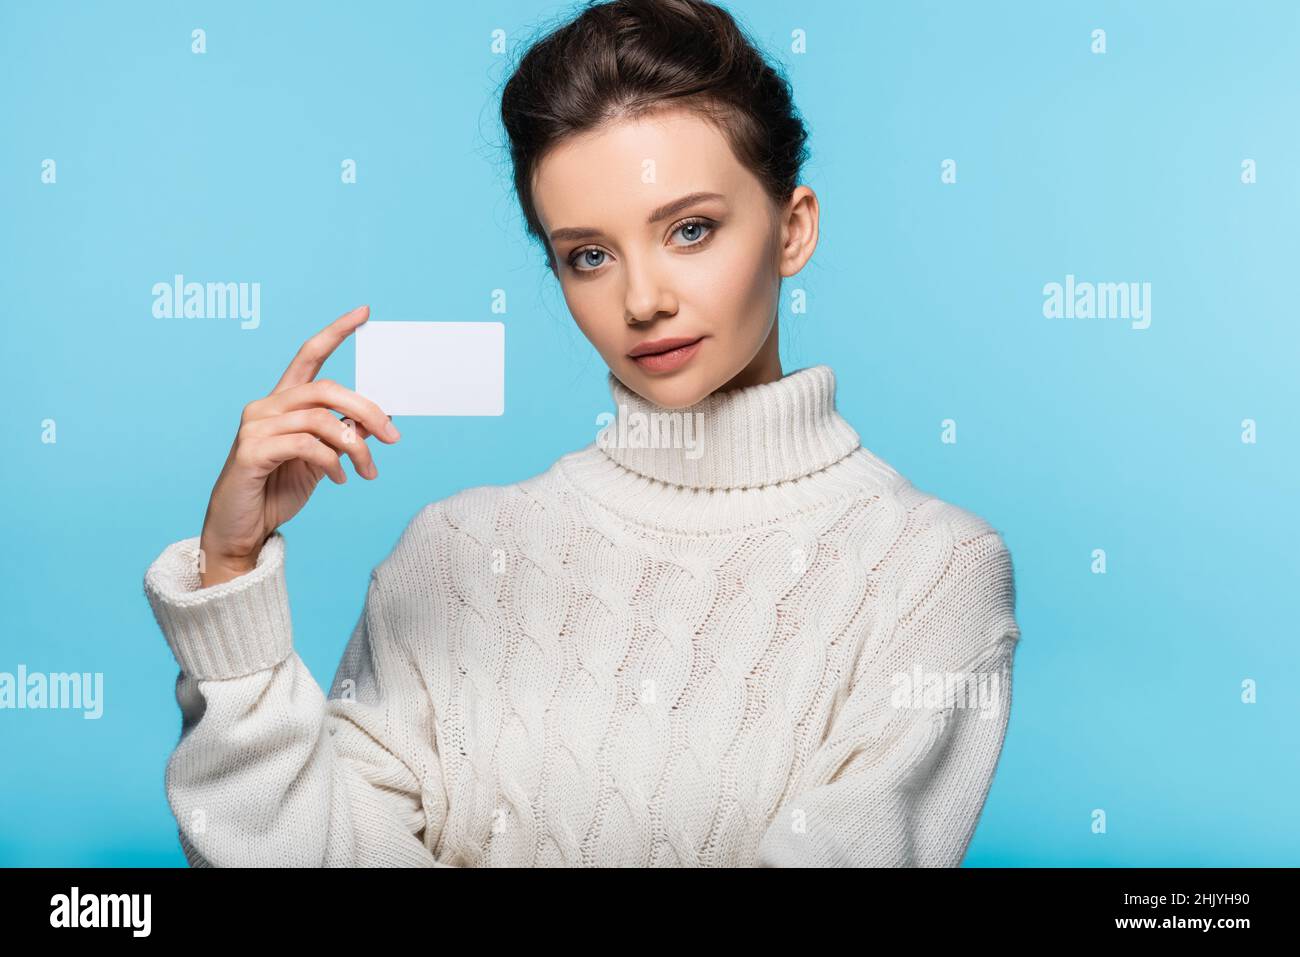 Model in white sweater holding blank card isolated on blue Stock Photo